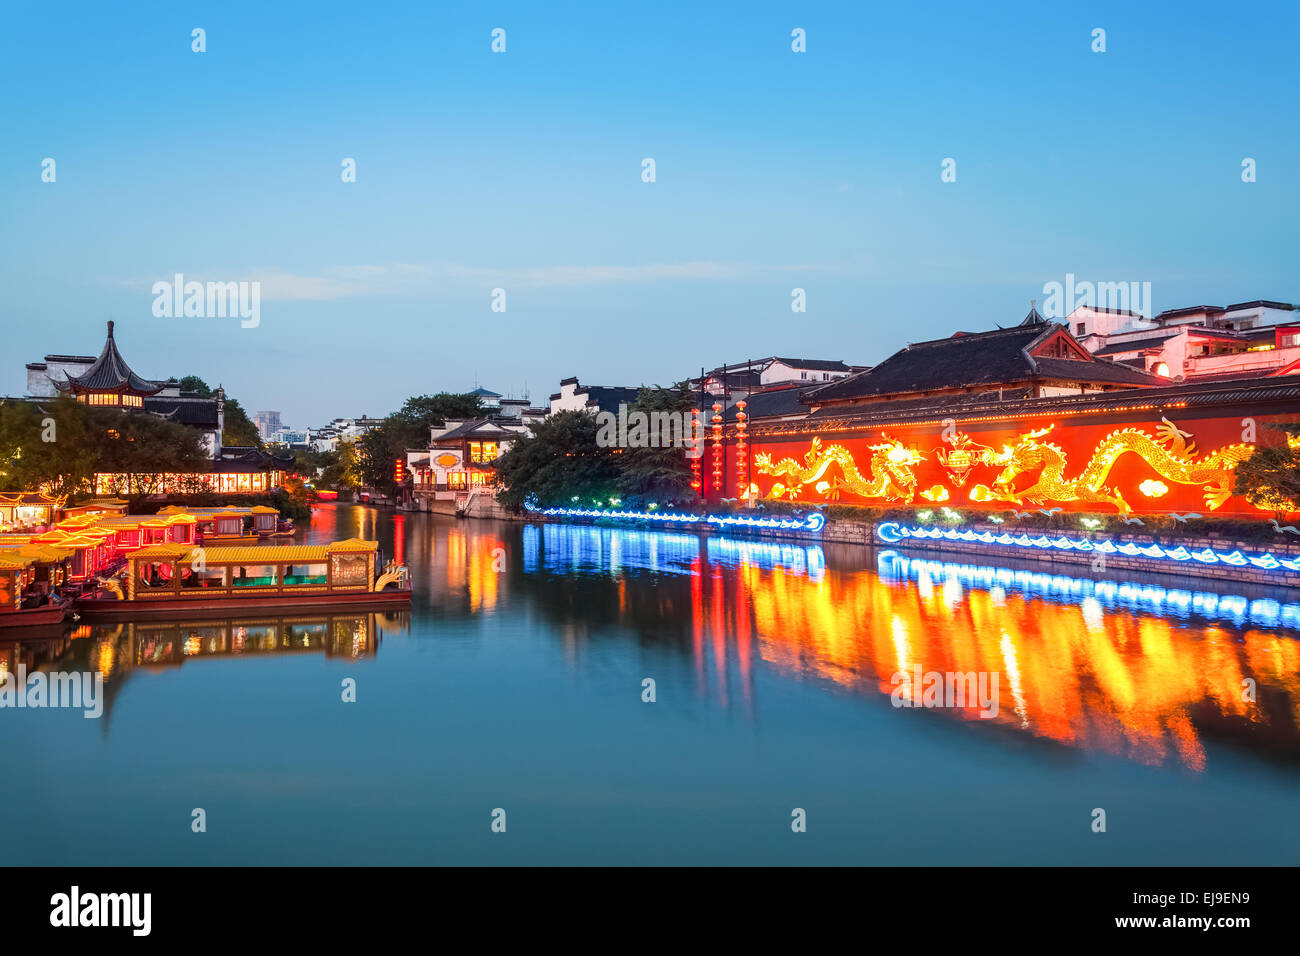 nanjing scenery of the confucius temple at dusk Stock Photo